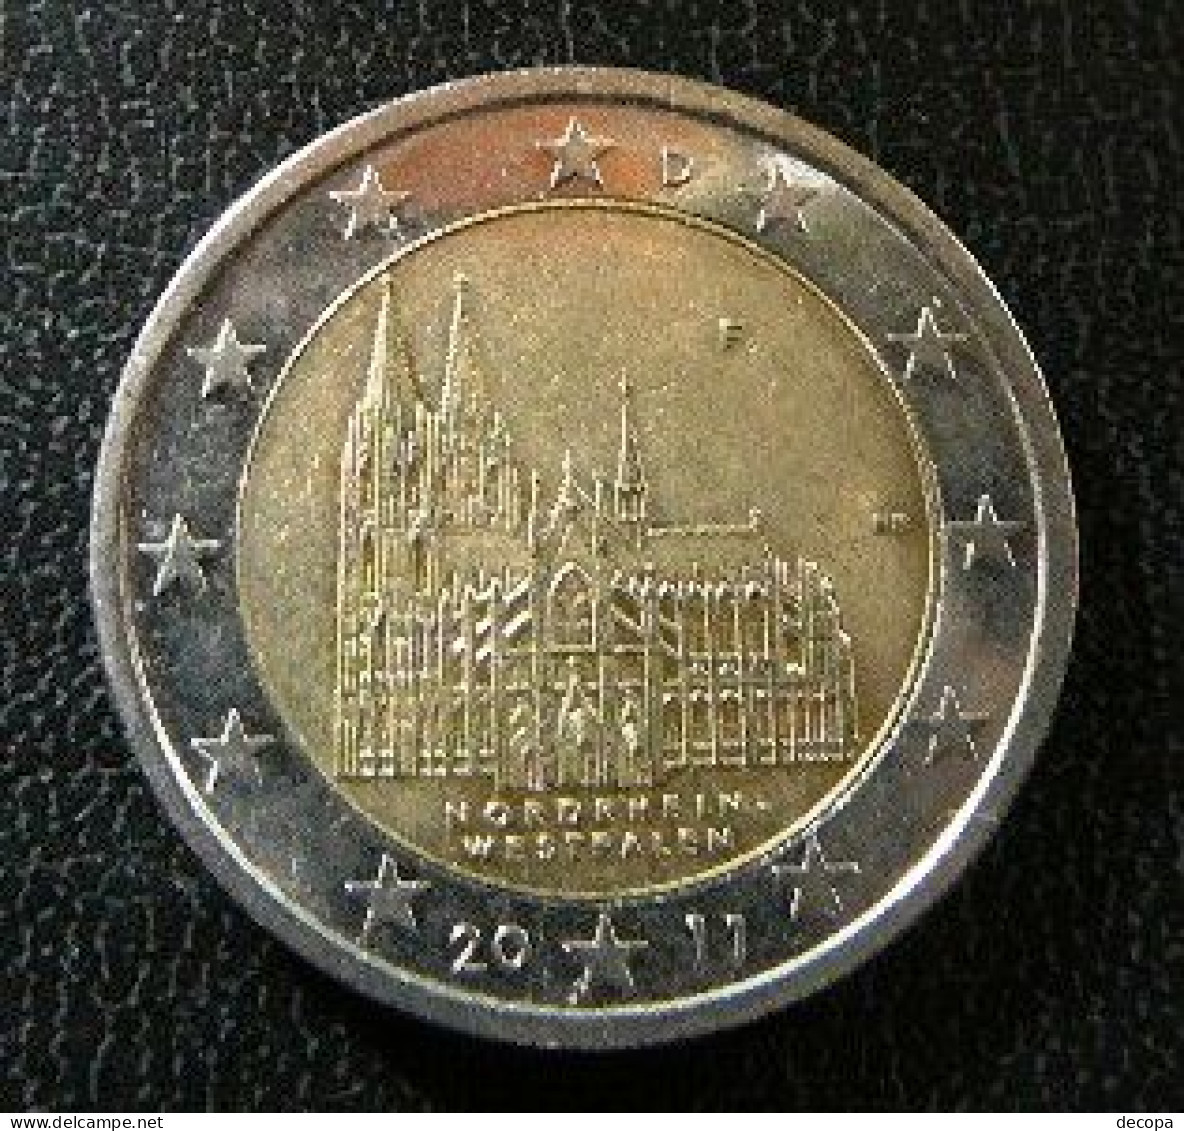 Germany - Allemagne - Duitsland   2 EURO 2011 F     Speciale Uitgave - Commemorative - Germany